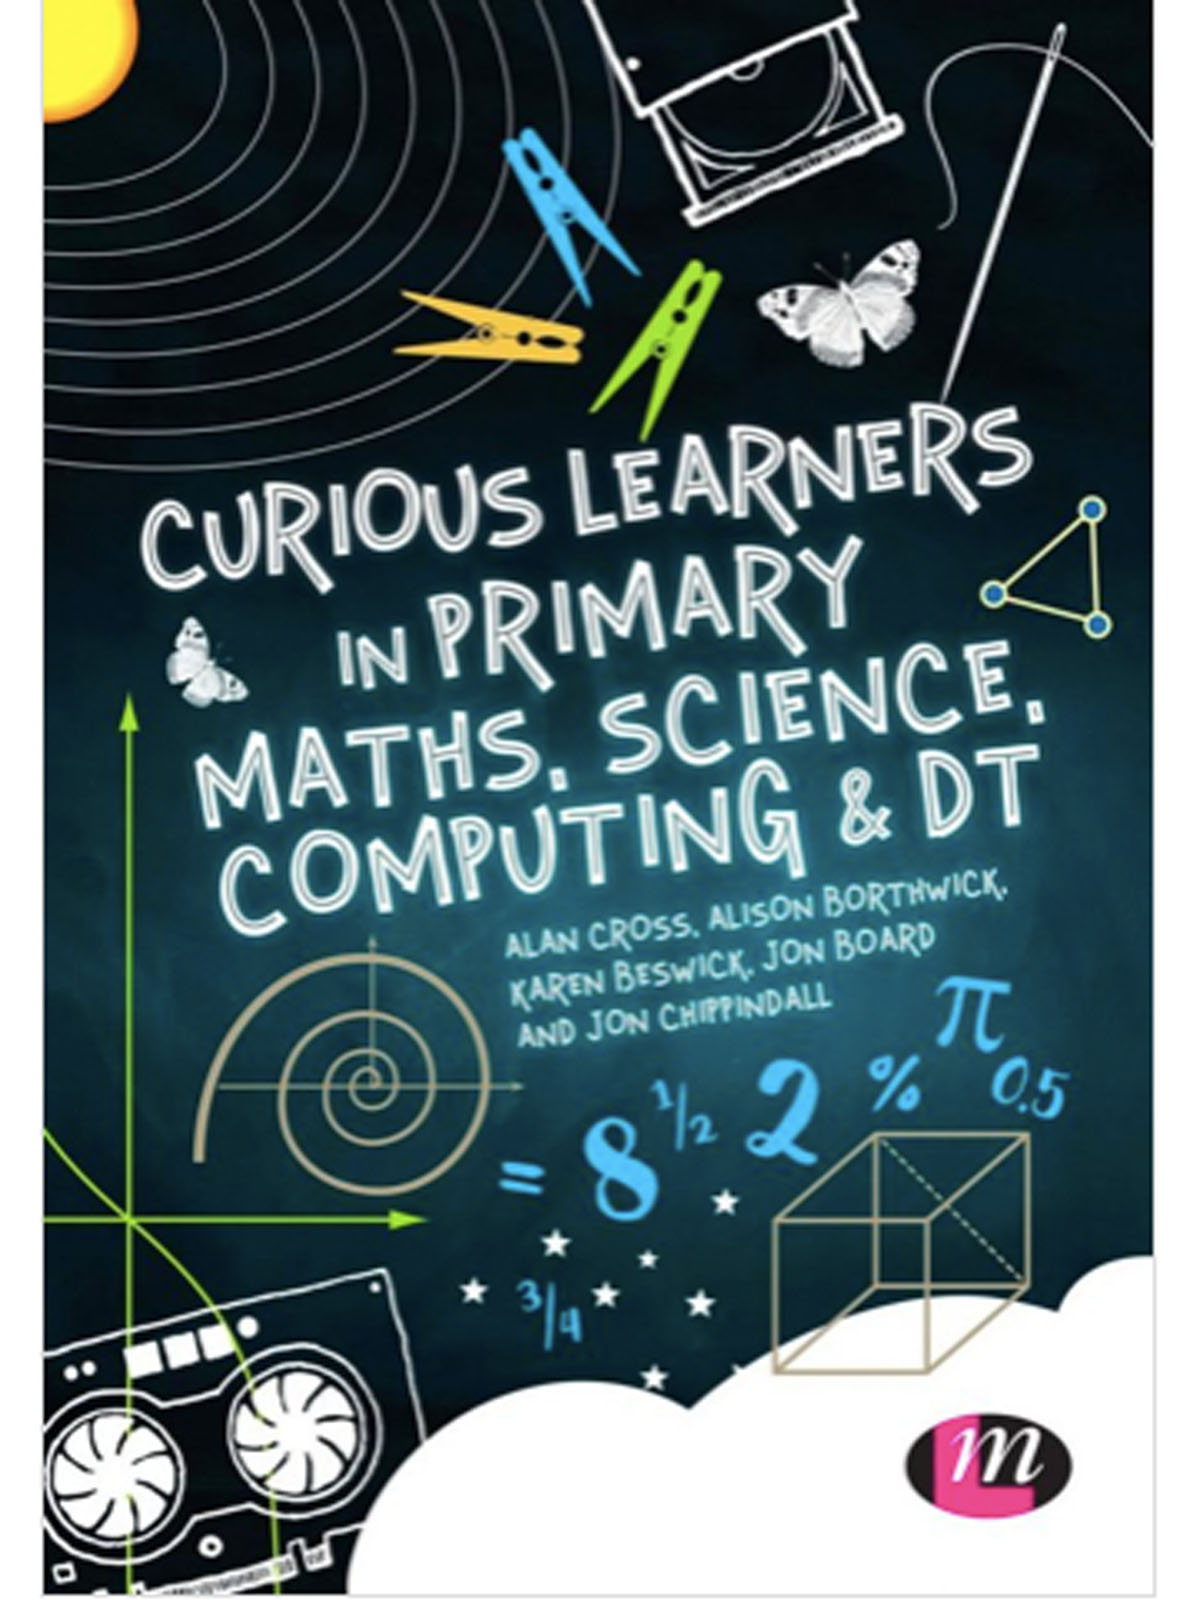 Curious Learners in Primary Maths, Science, Computing and DT by Alison Borthwick